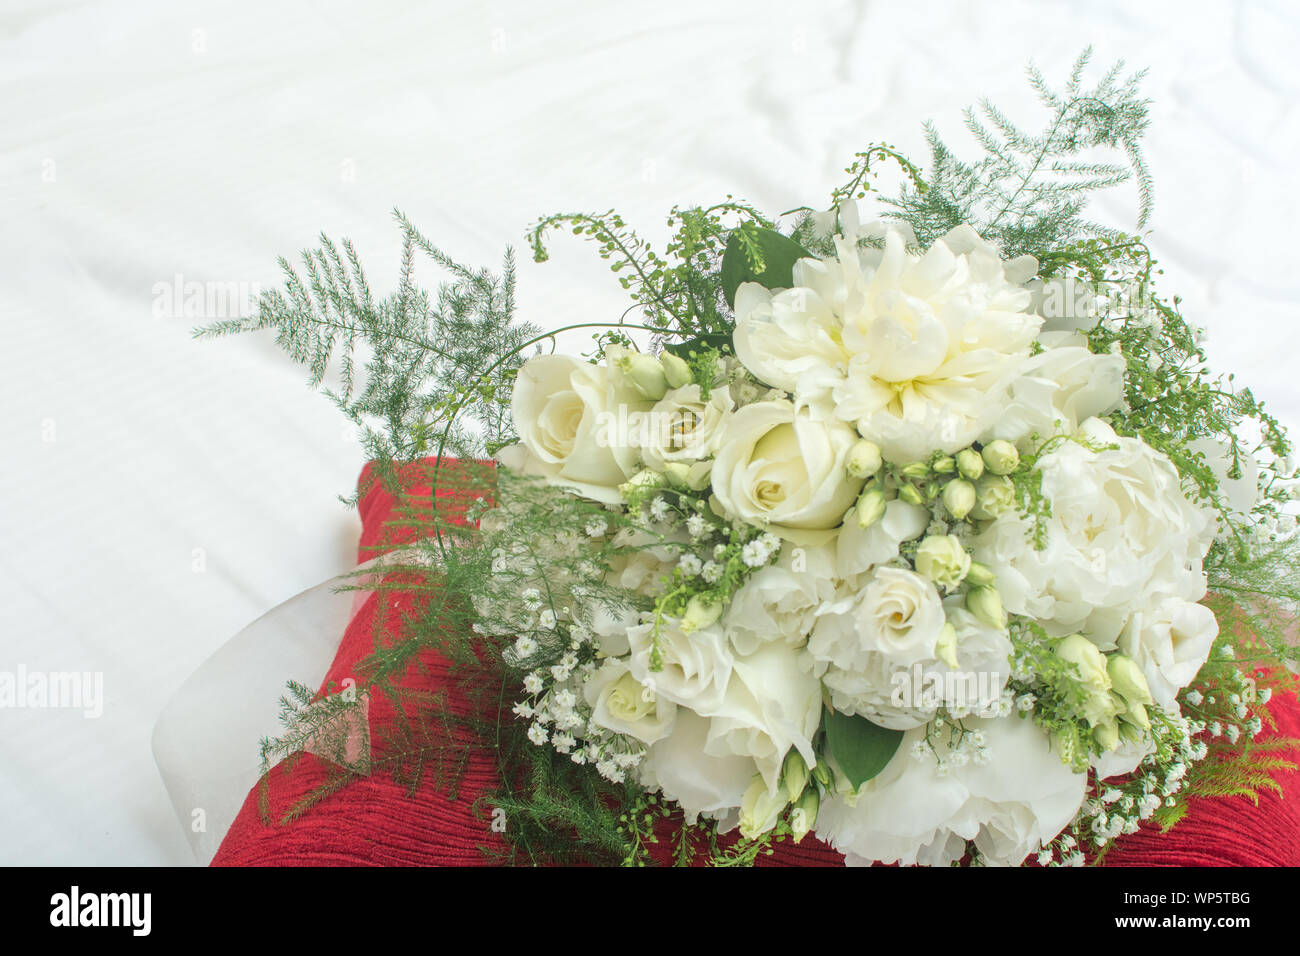 Wedding flowers Bridal bouquet of white flowers tied with a ribbon Stock Photo